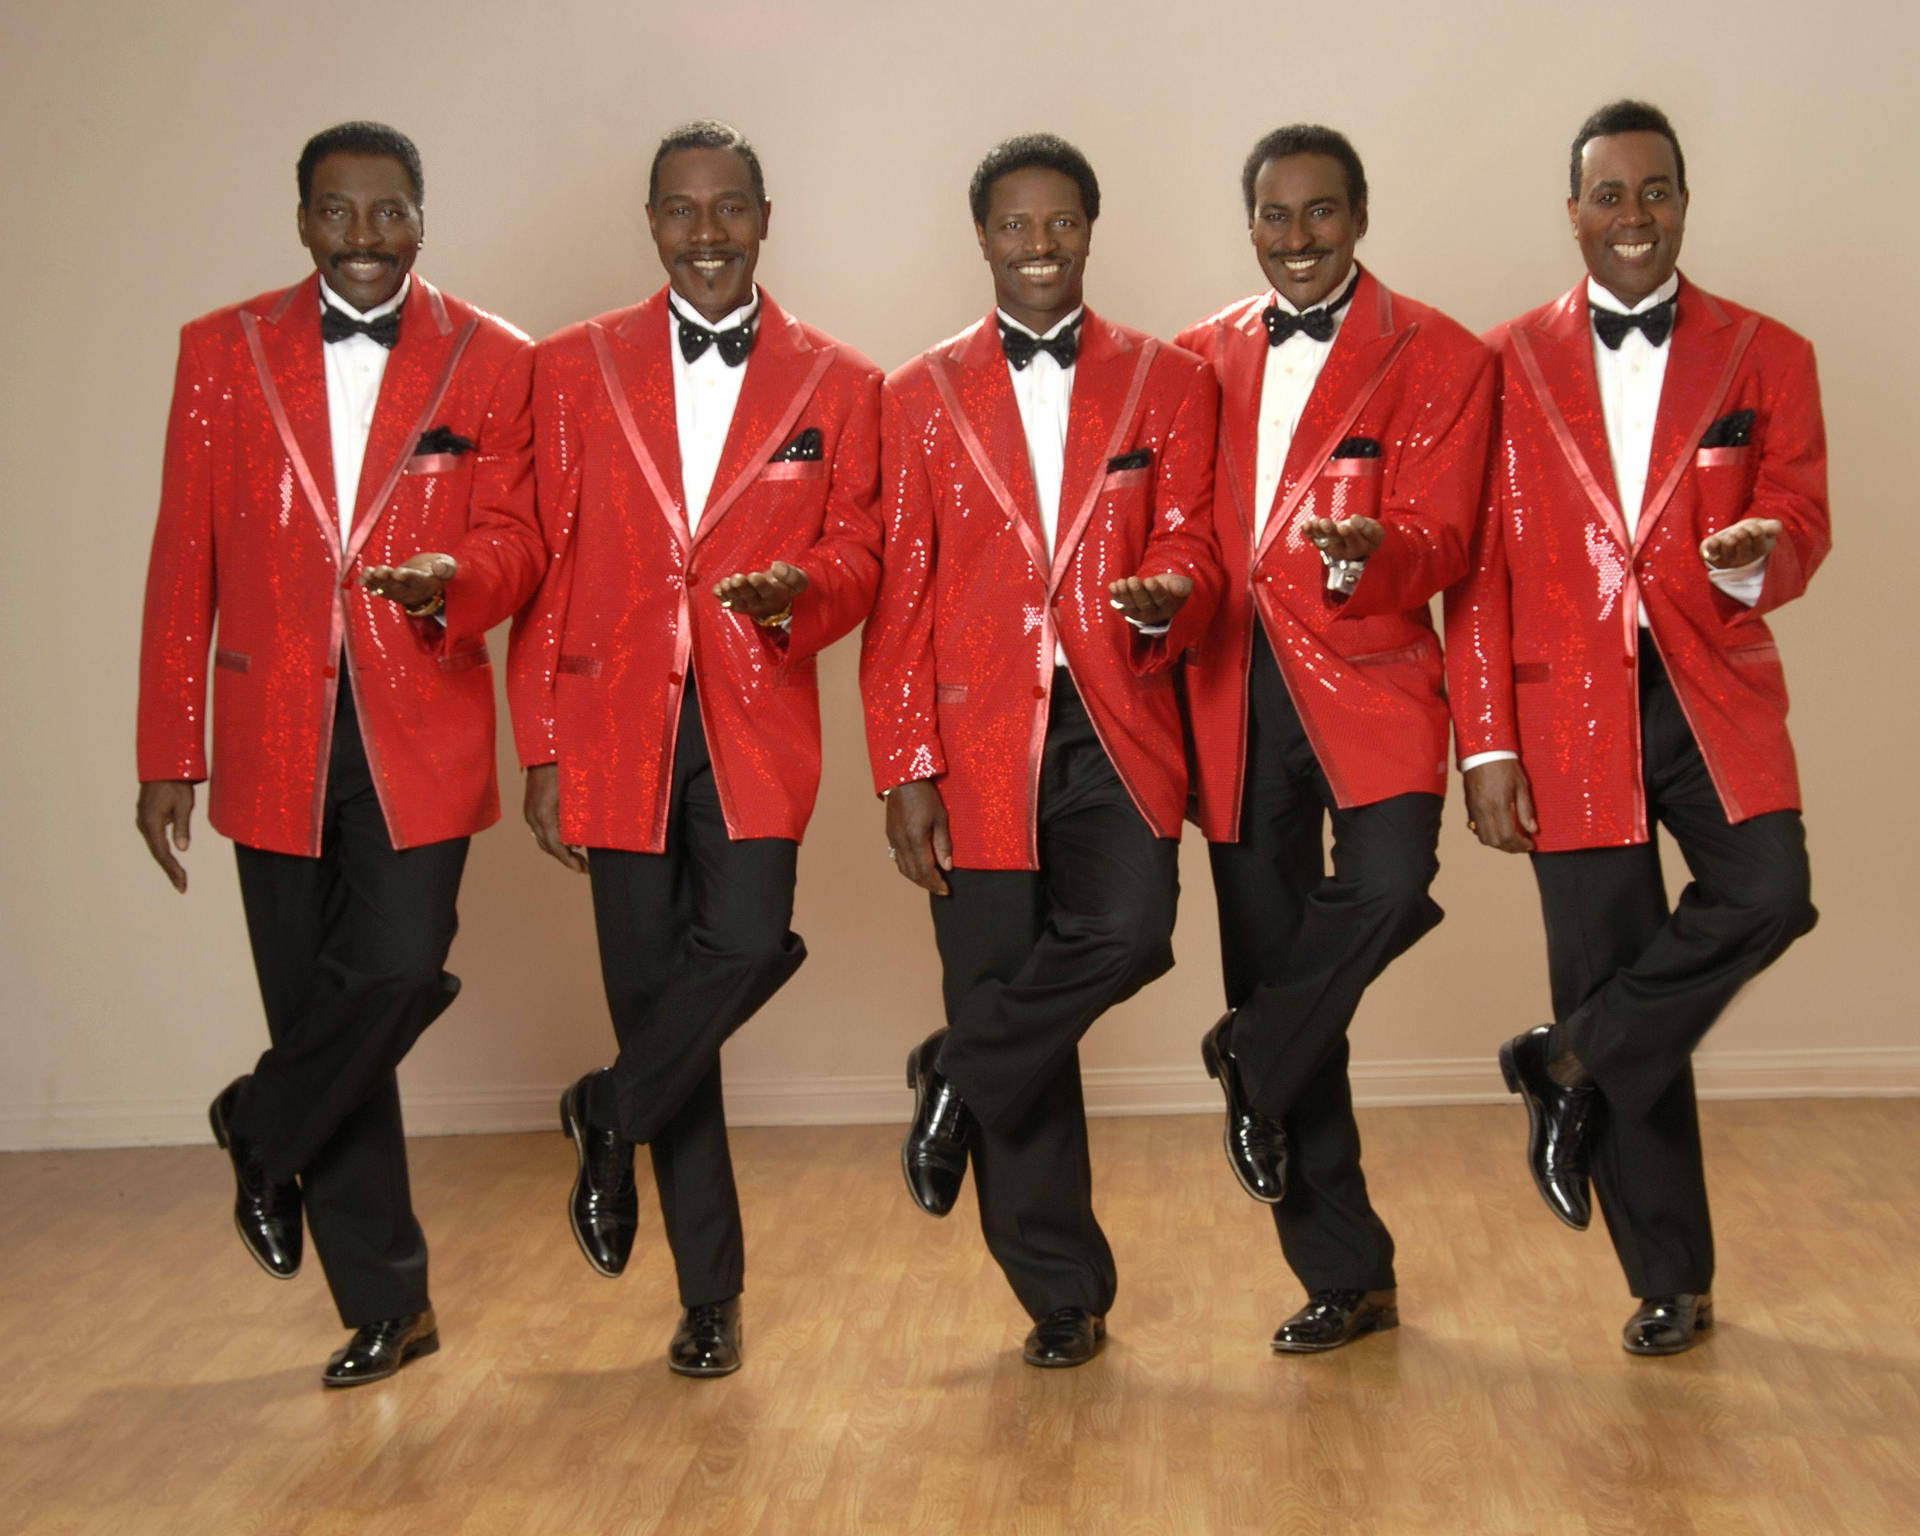 American Musical Group The Temptations Red Suit Vintage Shot Wallpaper